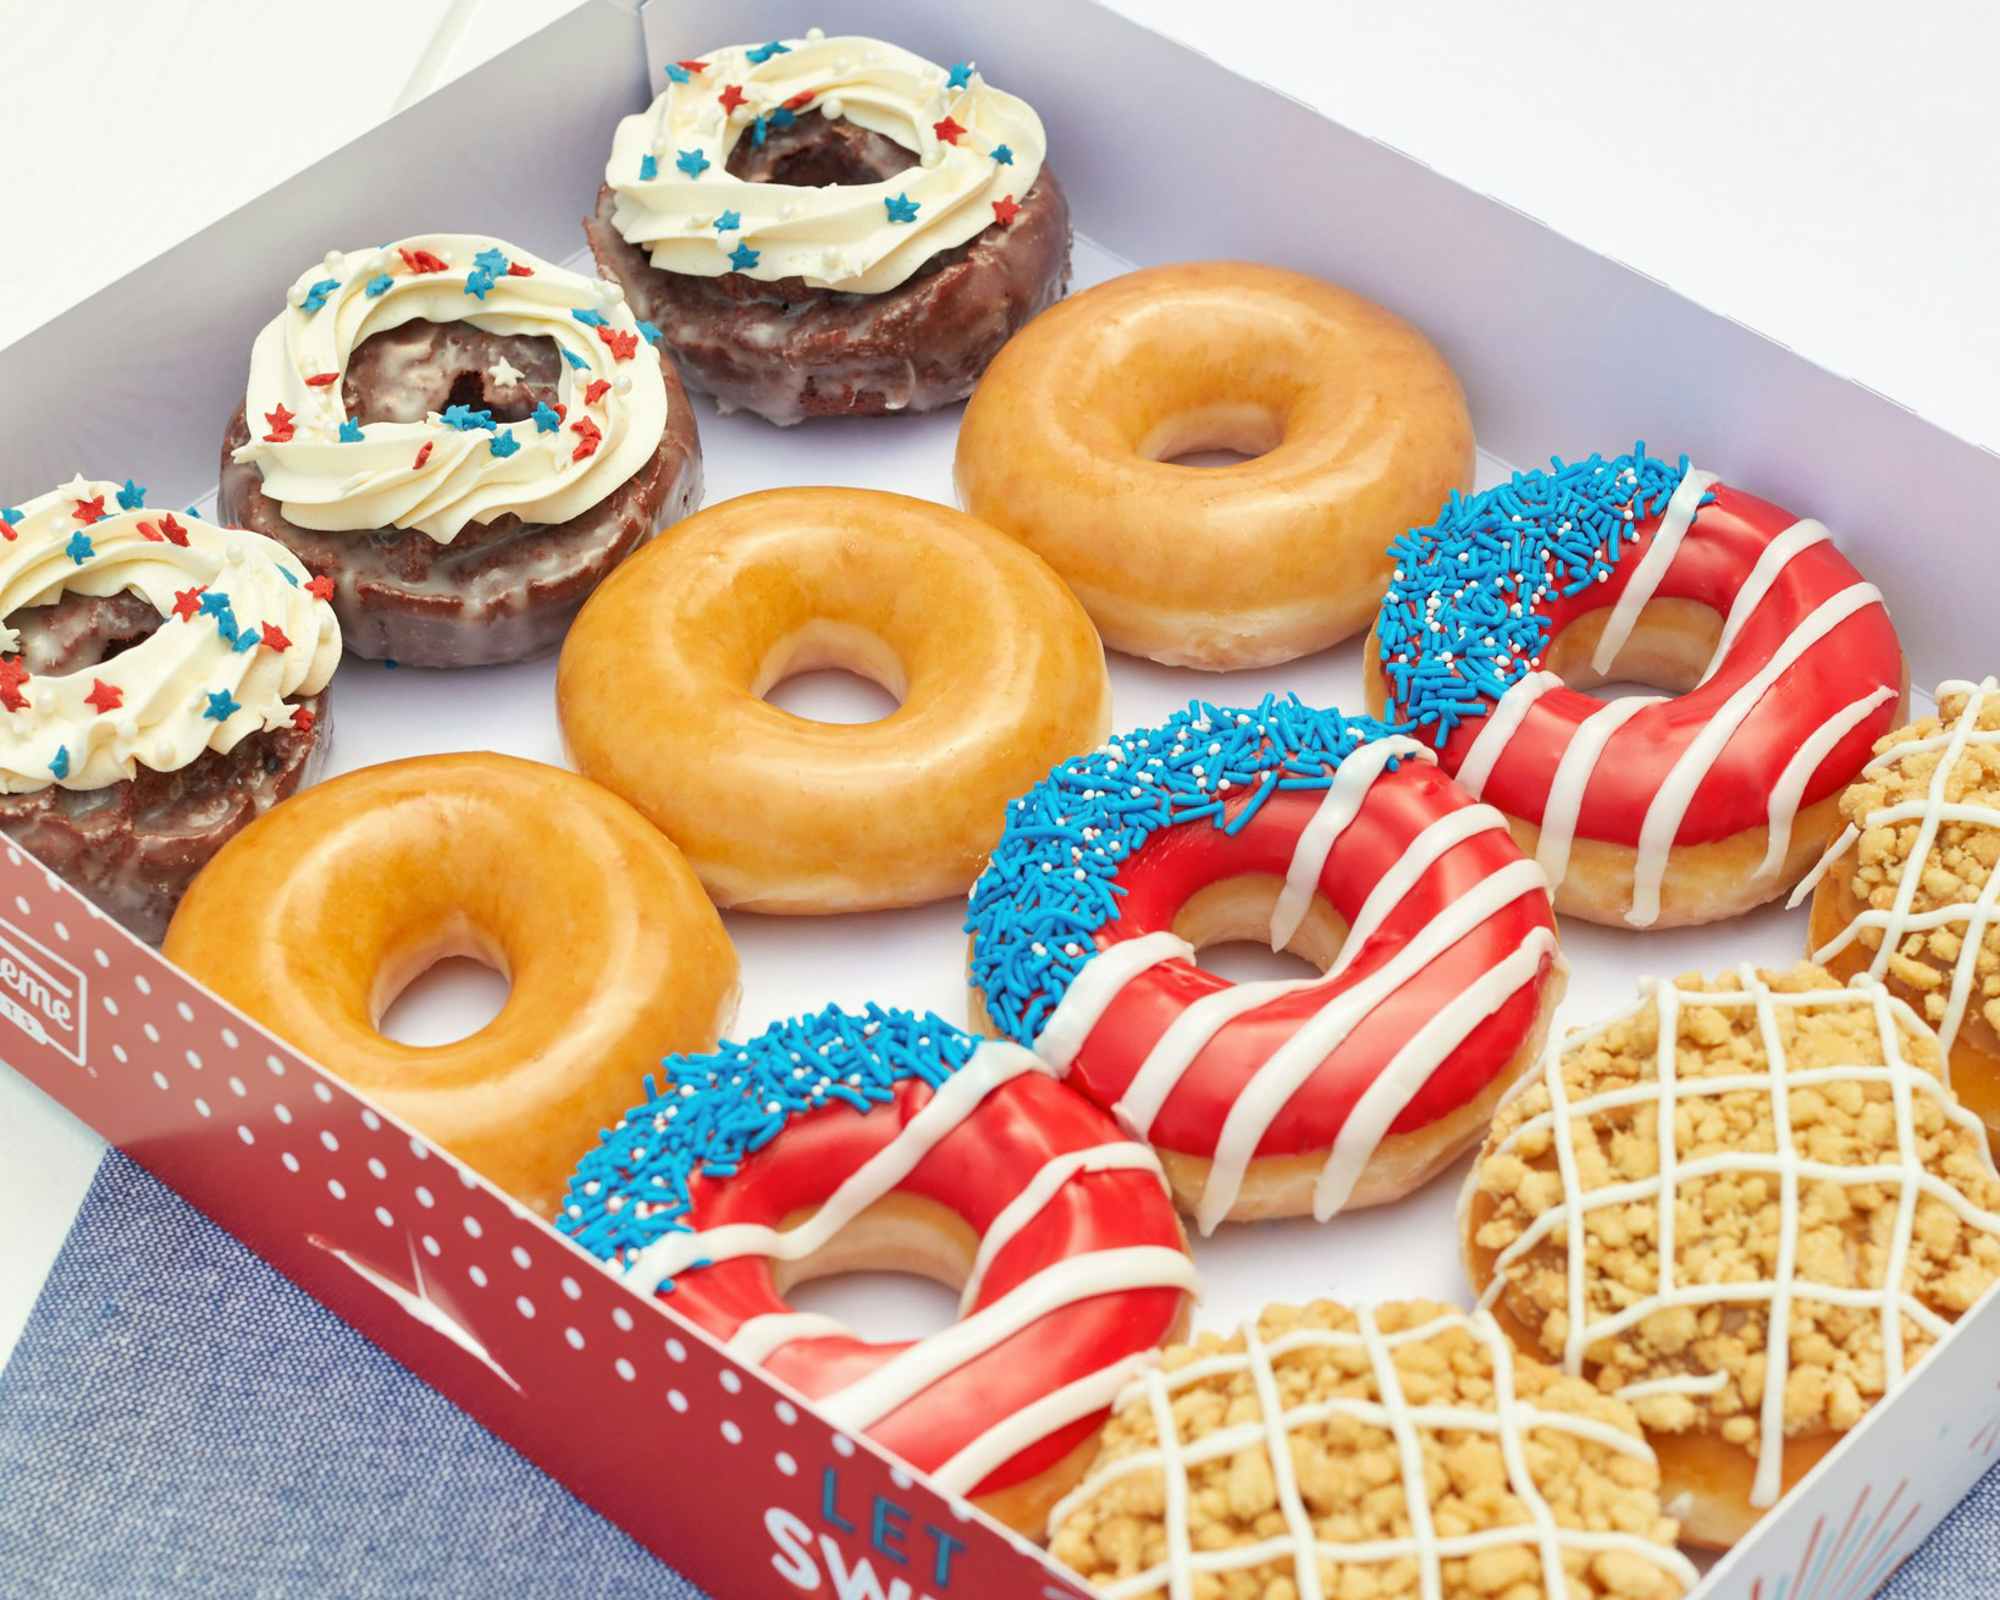 Red, White, and Blue themed doughnuts from Krispy Kreme in a box